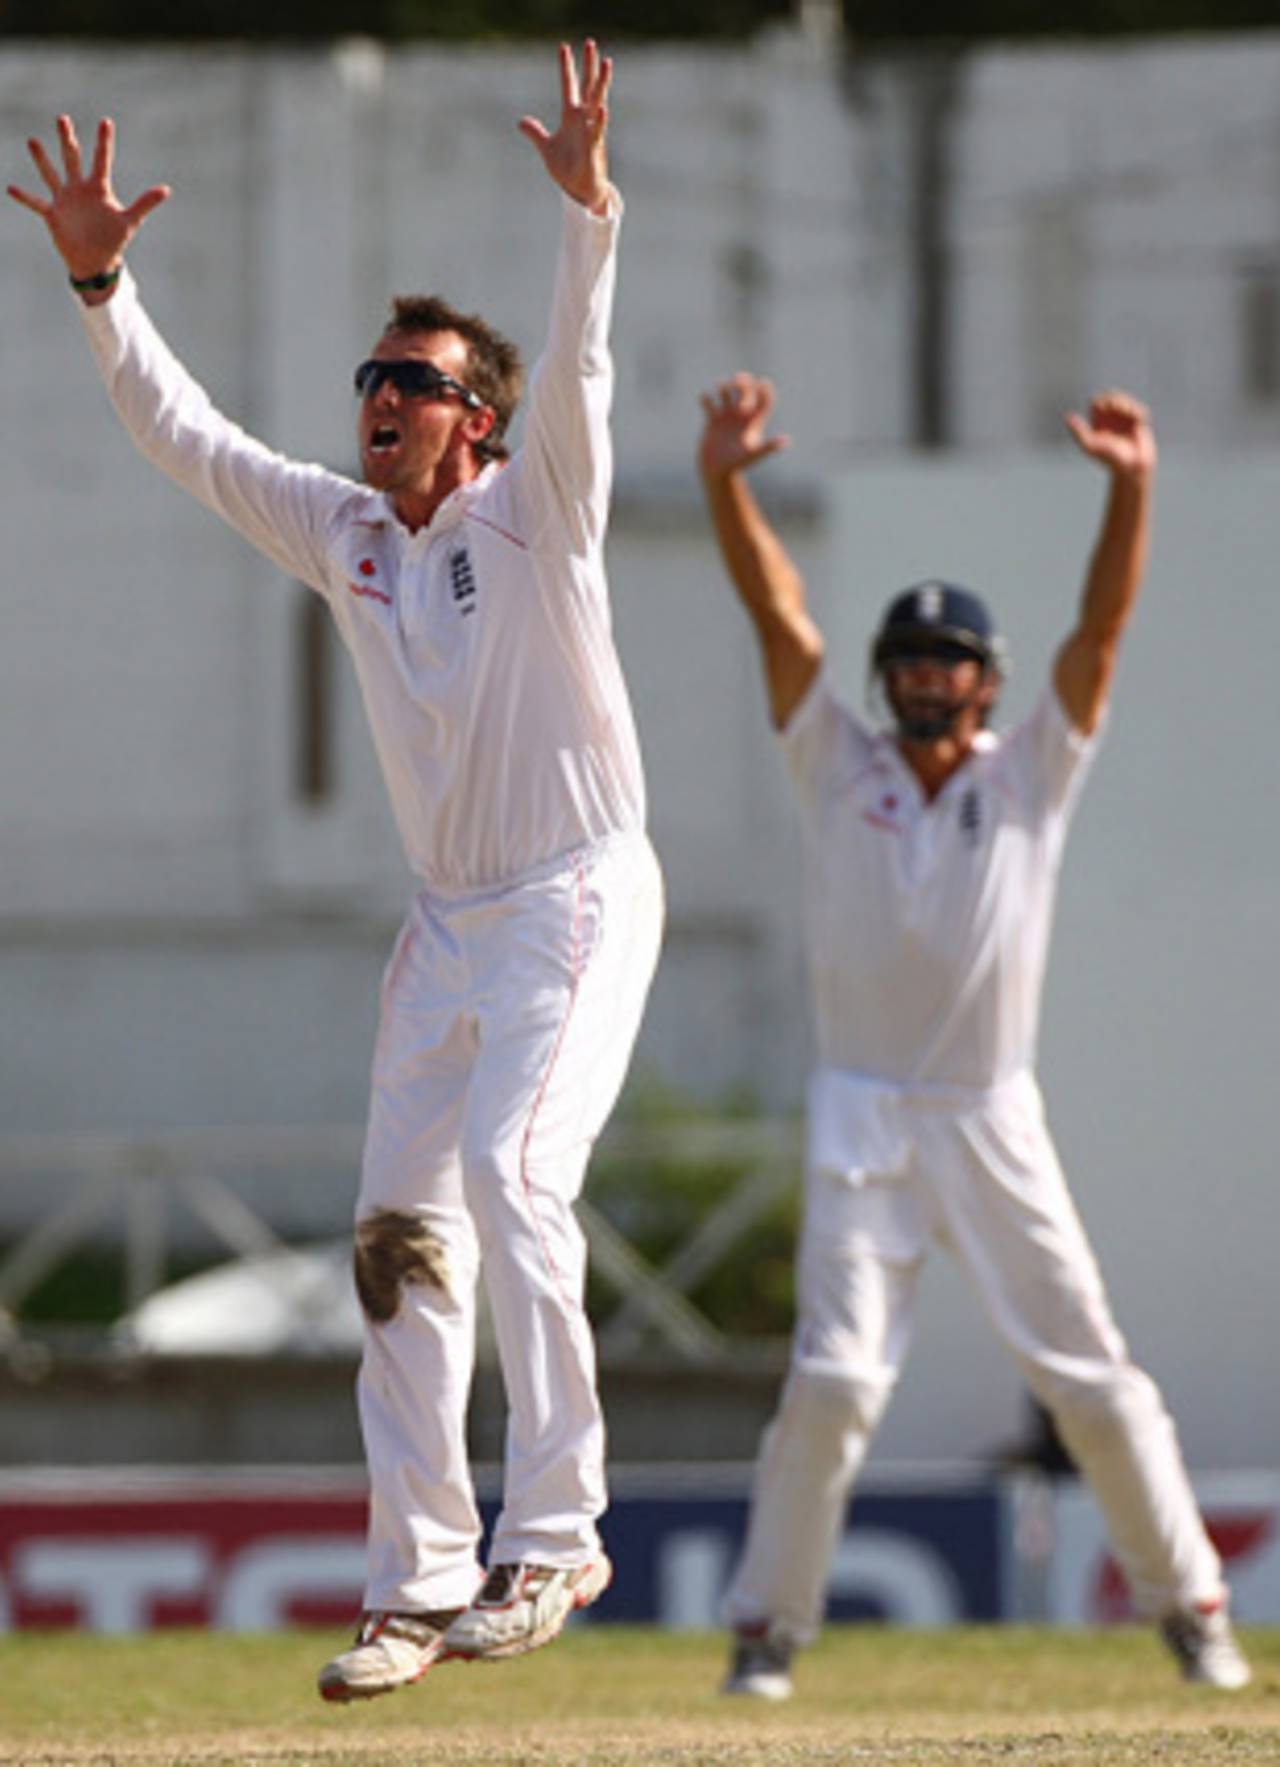 A desperate Graeme Swann roars another hopeful appeal as England desperately sought wickets in Antigua, West Indies v England, 3rd Test, Antigua, 5th day, February 19, 2009